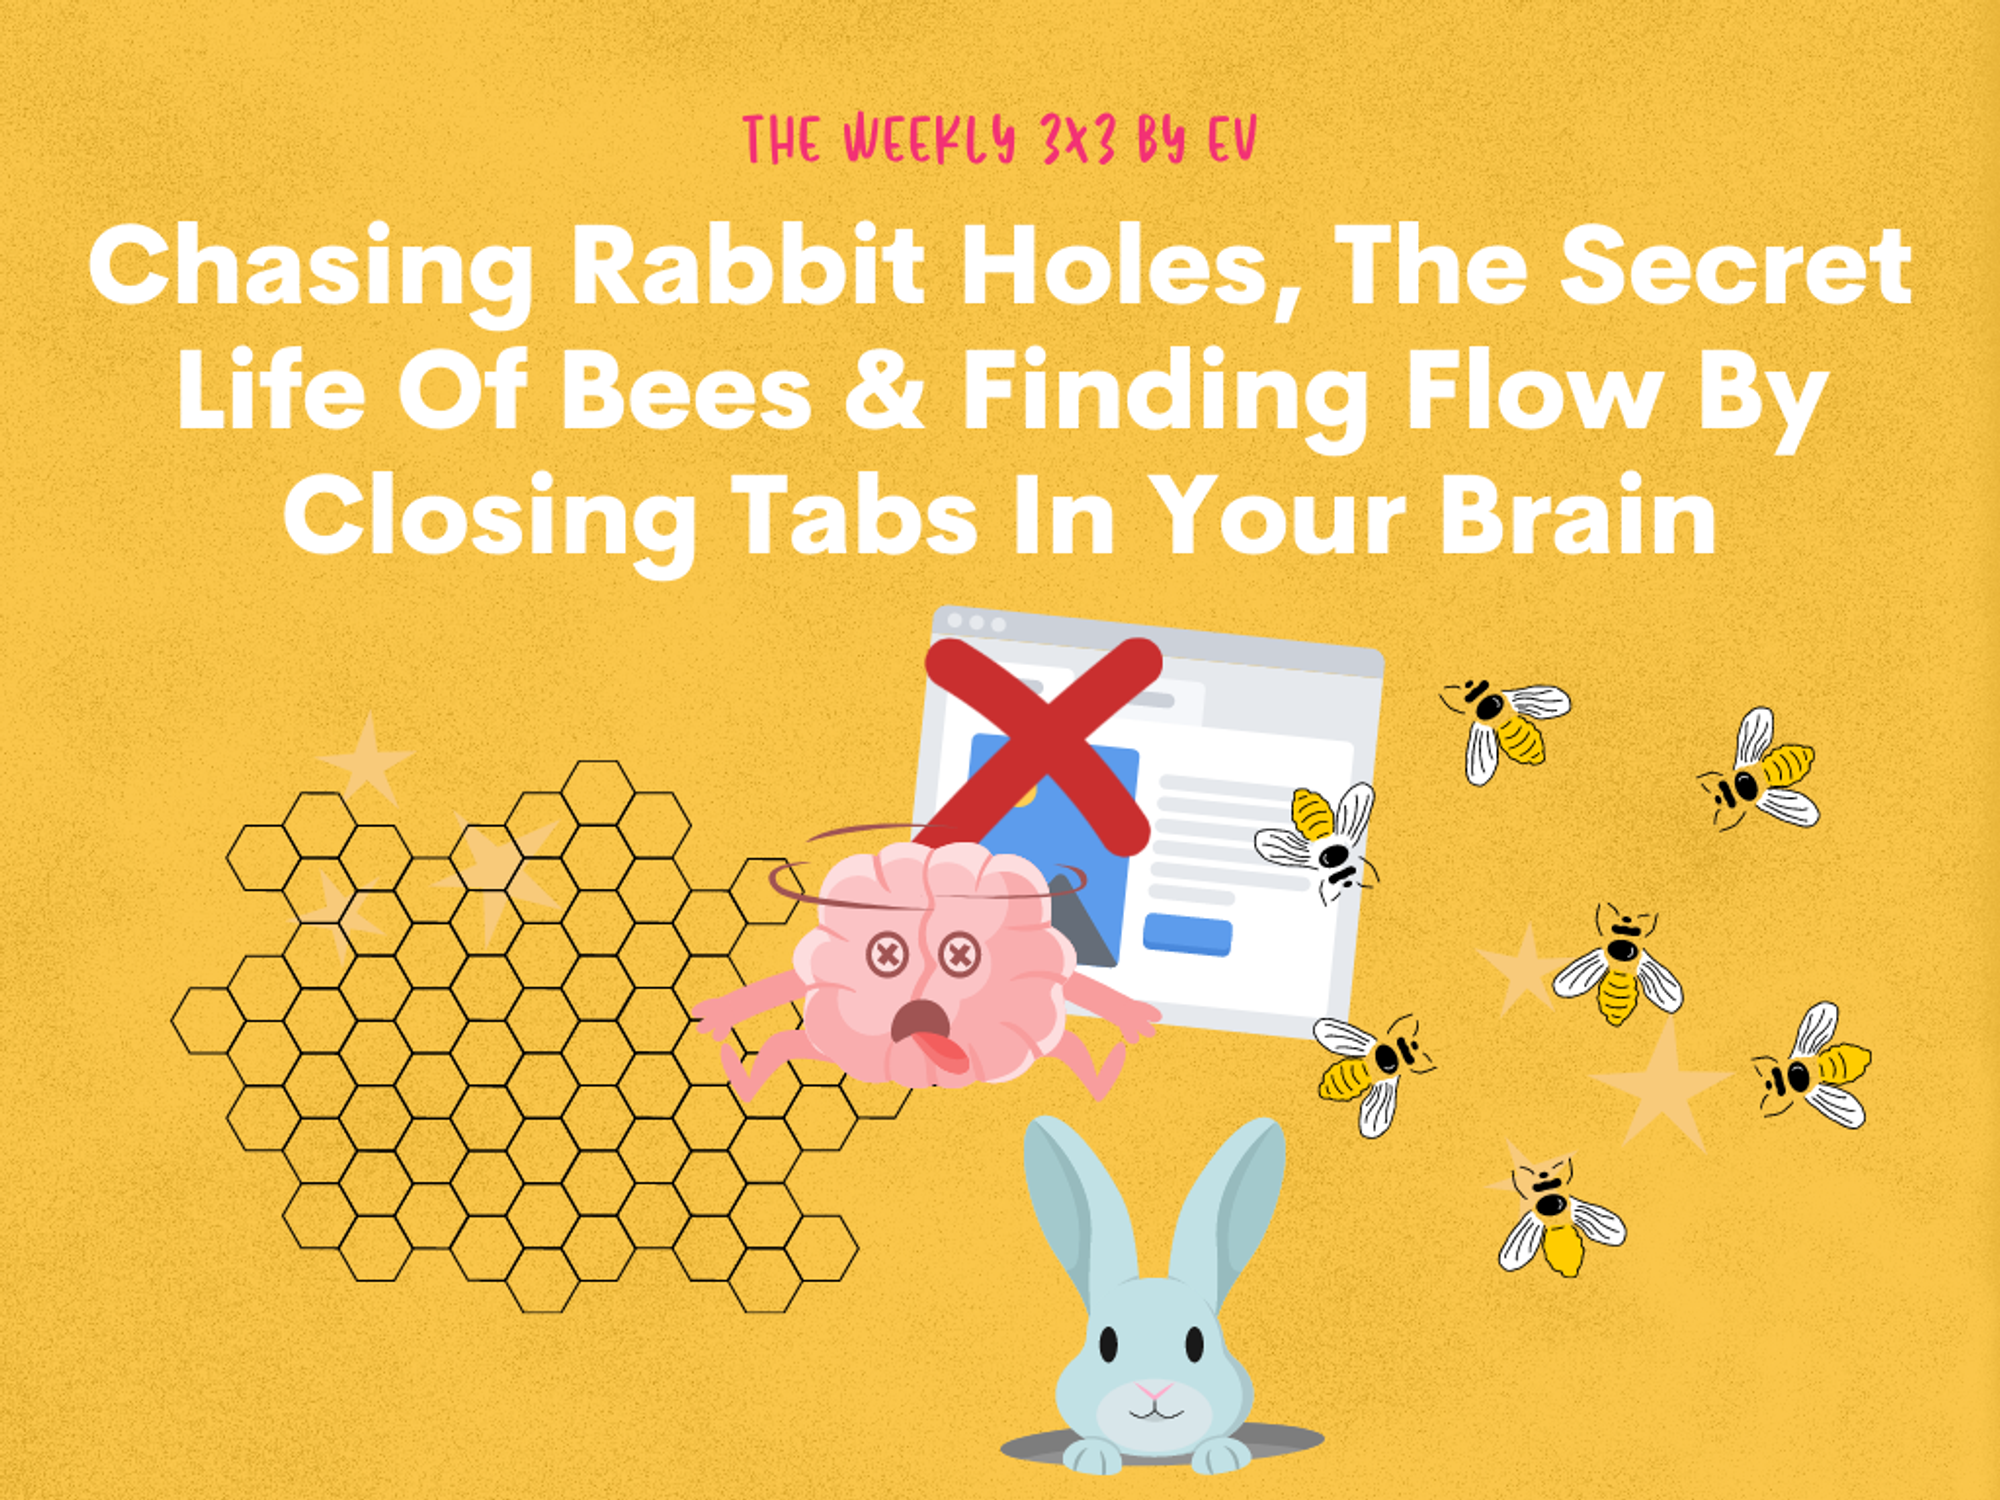 Chasing Rabbit Holes, The Secret Life Of Bees & Closing Tabs In Your Brain